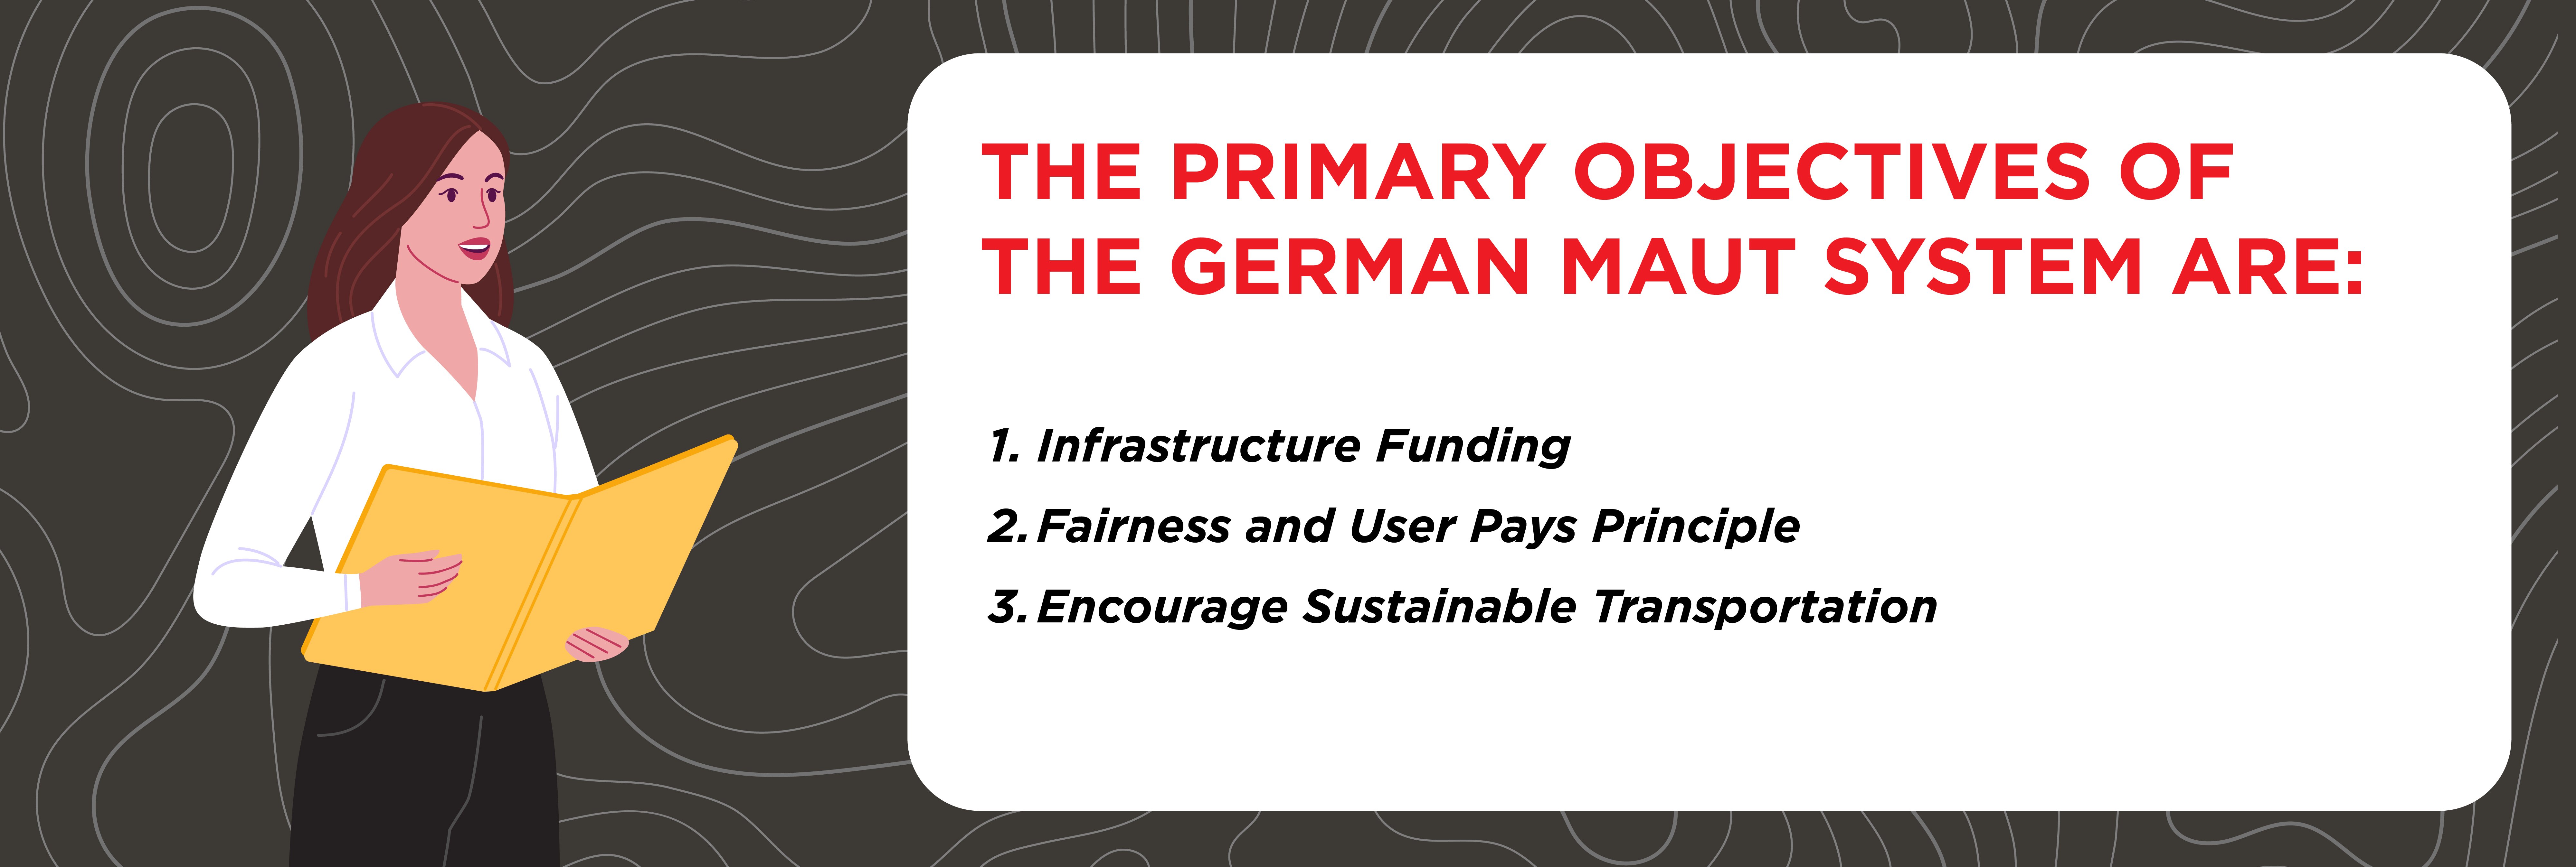 The three primary objectives of the German Maut System are infastructure funding, fairness and user pays principle, and to encourage sustainable transportation